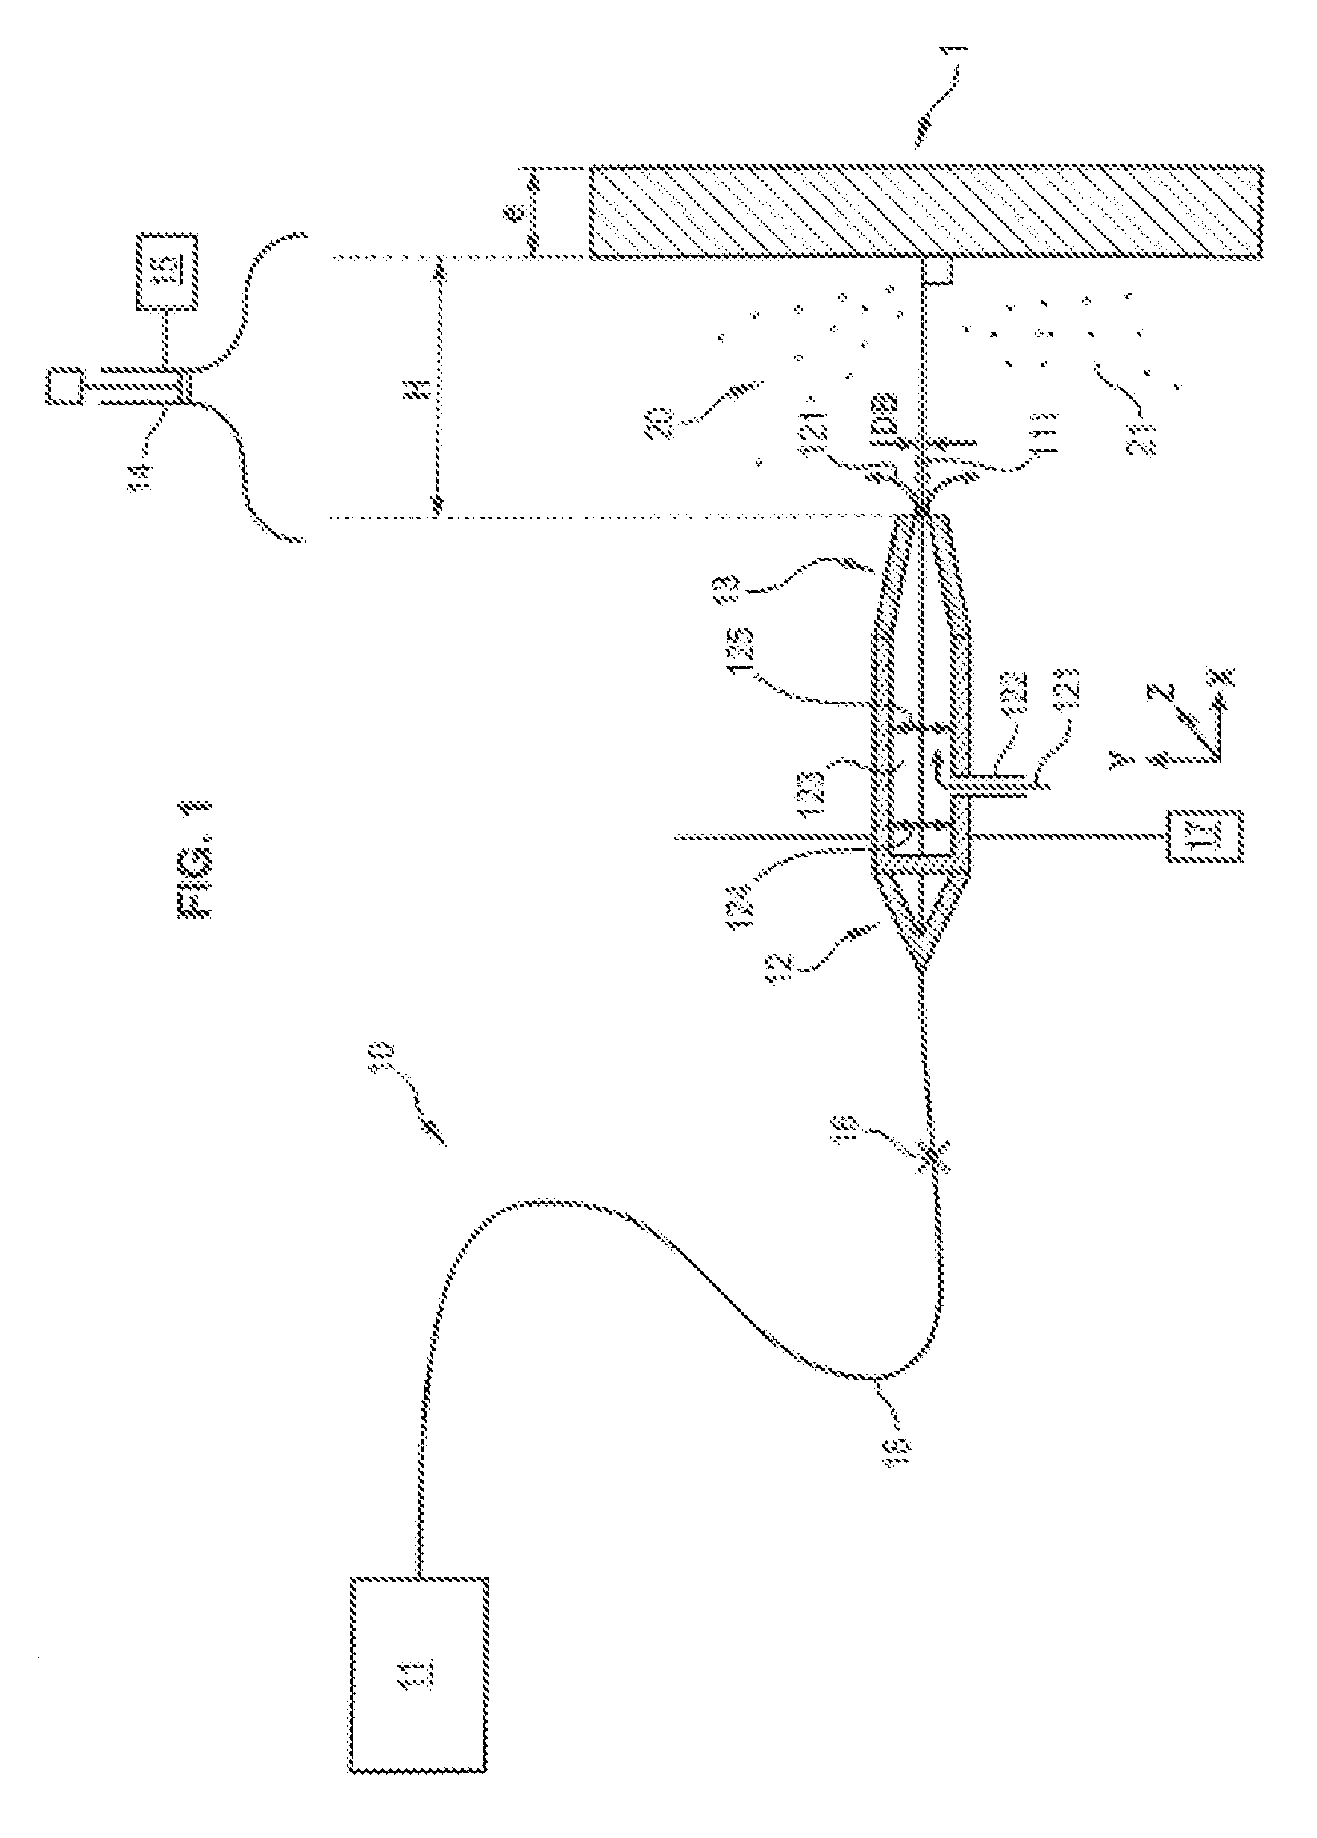 Laser cutting method optimized in terms of mass defect per unit length